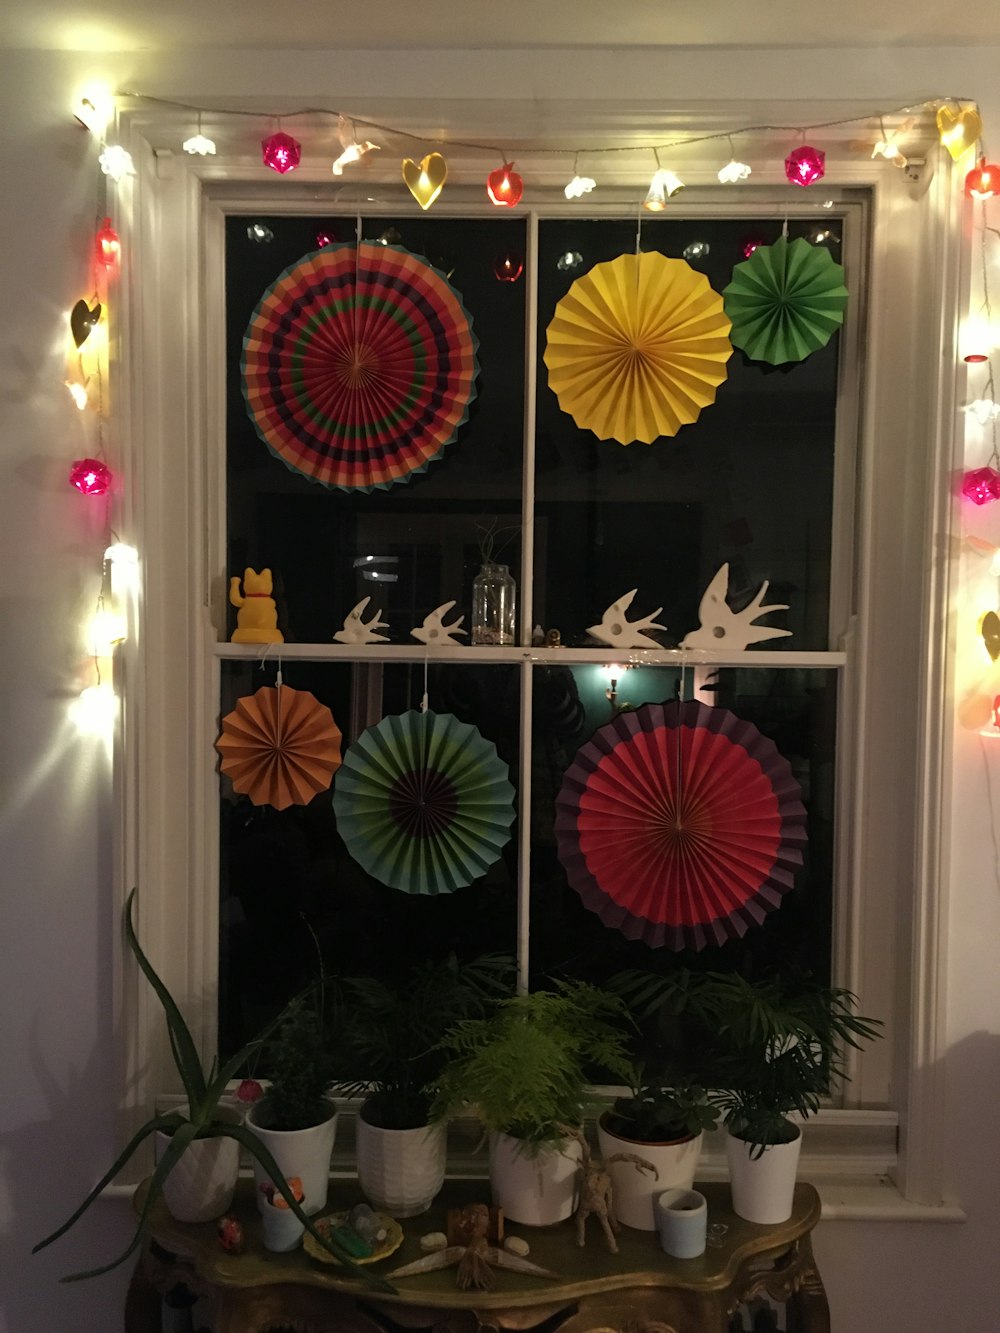 a window decorated with paper fans and potted plants